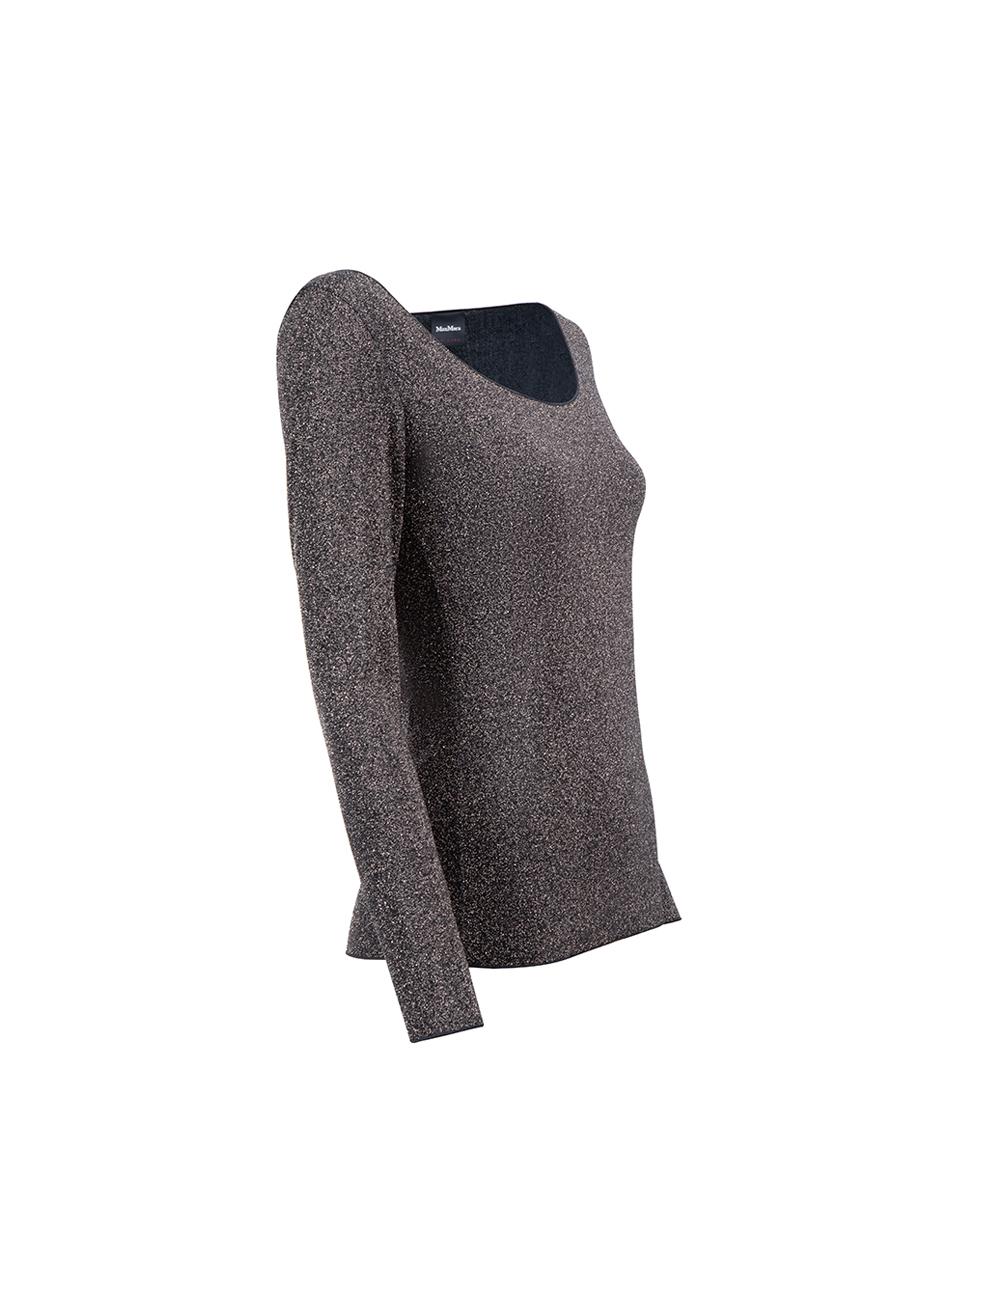 CONDITION is Very good. Hardly any visible wear to top is evident on this used Max Mara Leisure designer resale item.



Details


Navy

Glitter

Long sleeves top

Stretchy

Round neckline





Composition

NO COMPOSITION LABEL BUT FEELS LIKE